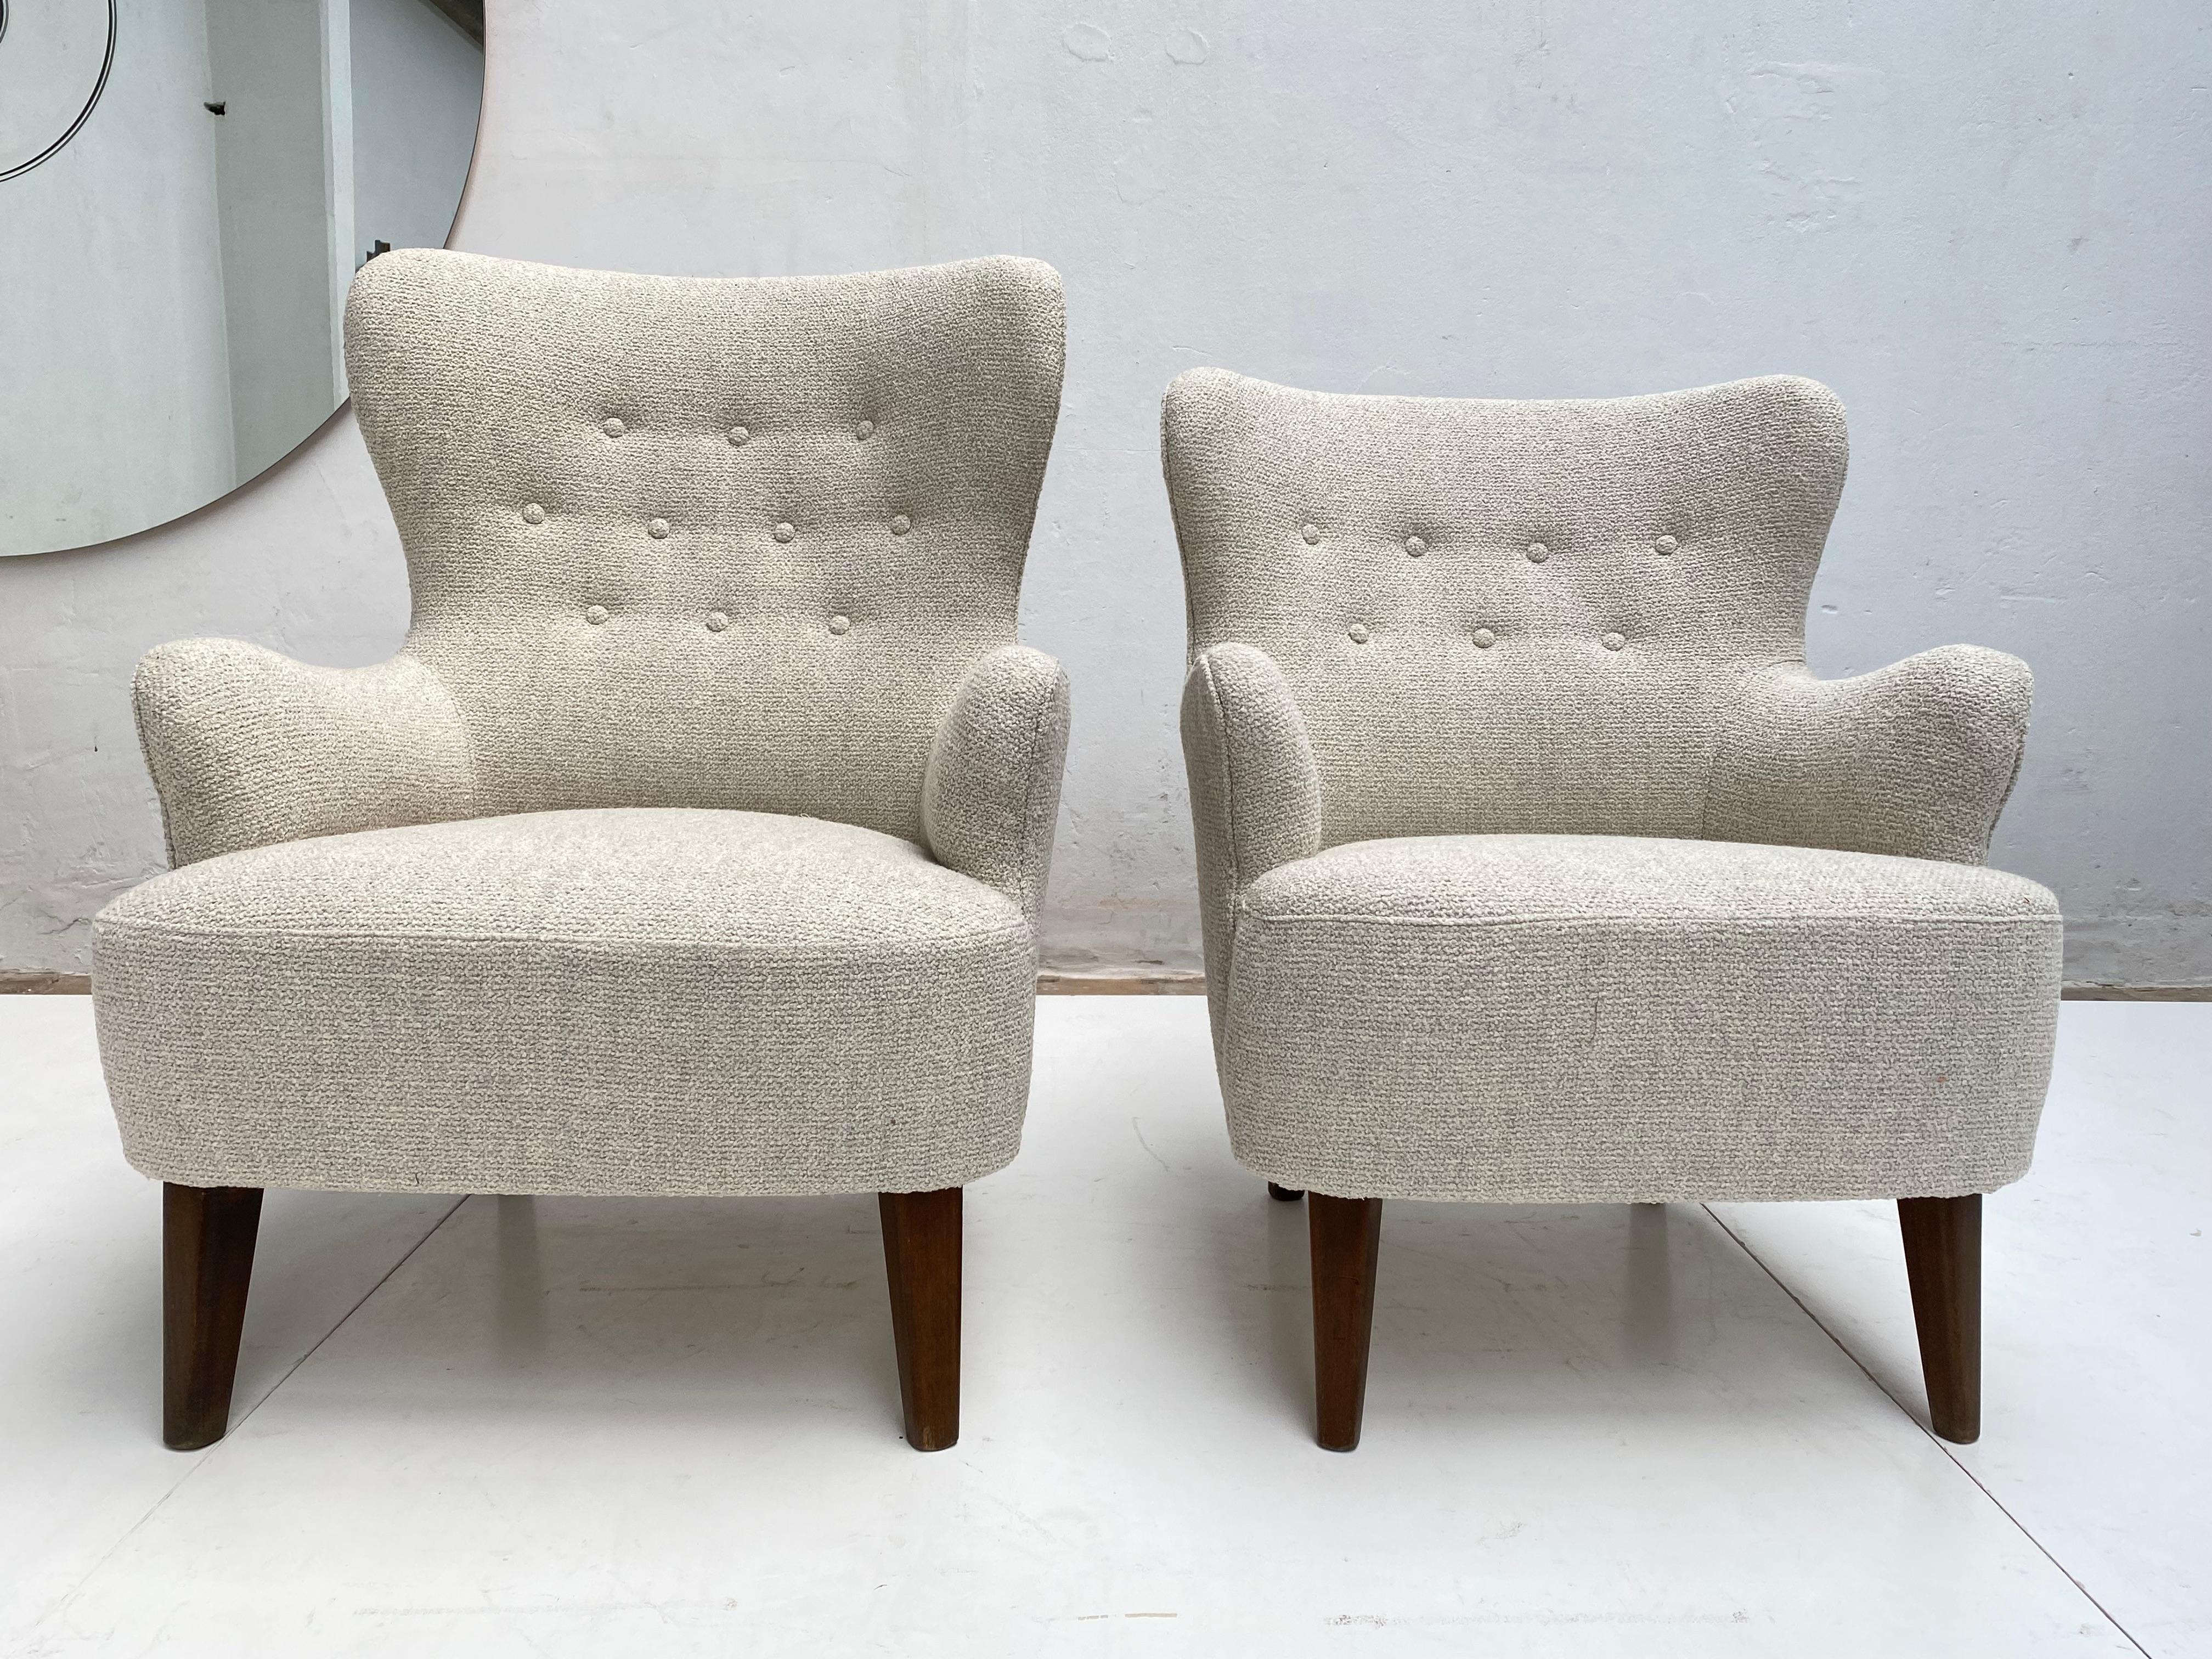 Pair of nicely curved wingback chairs in a senior and lady version by Dutch designer Their Ruth for Artifort manufactured in the 1950's

Photo's of the complete classic reupholstery proces are featured in this listing showing the craftsmanship we